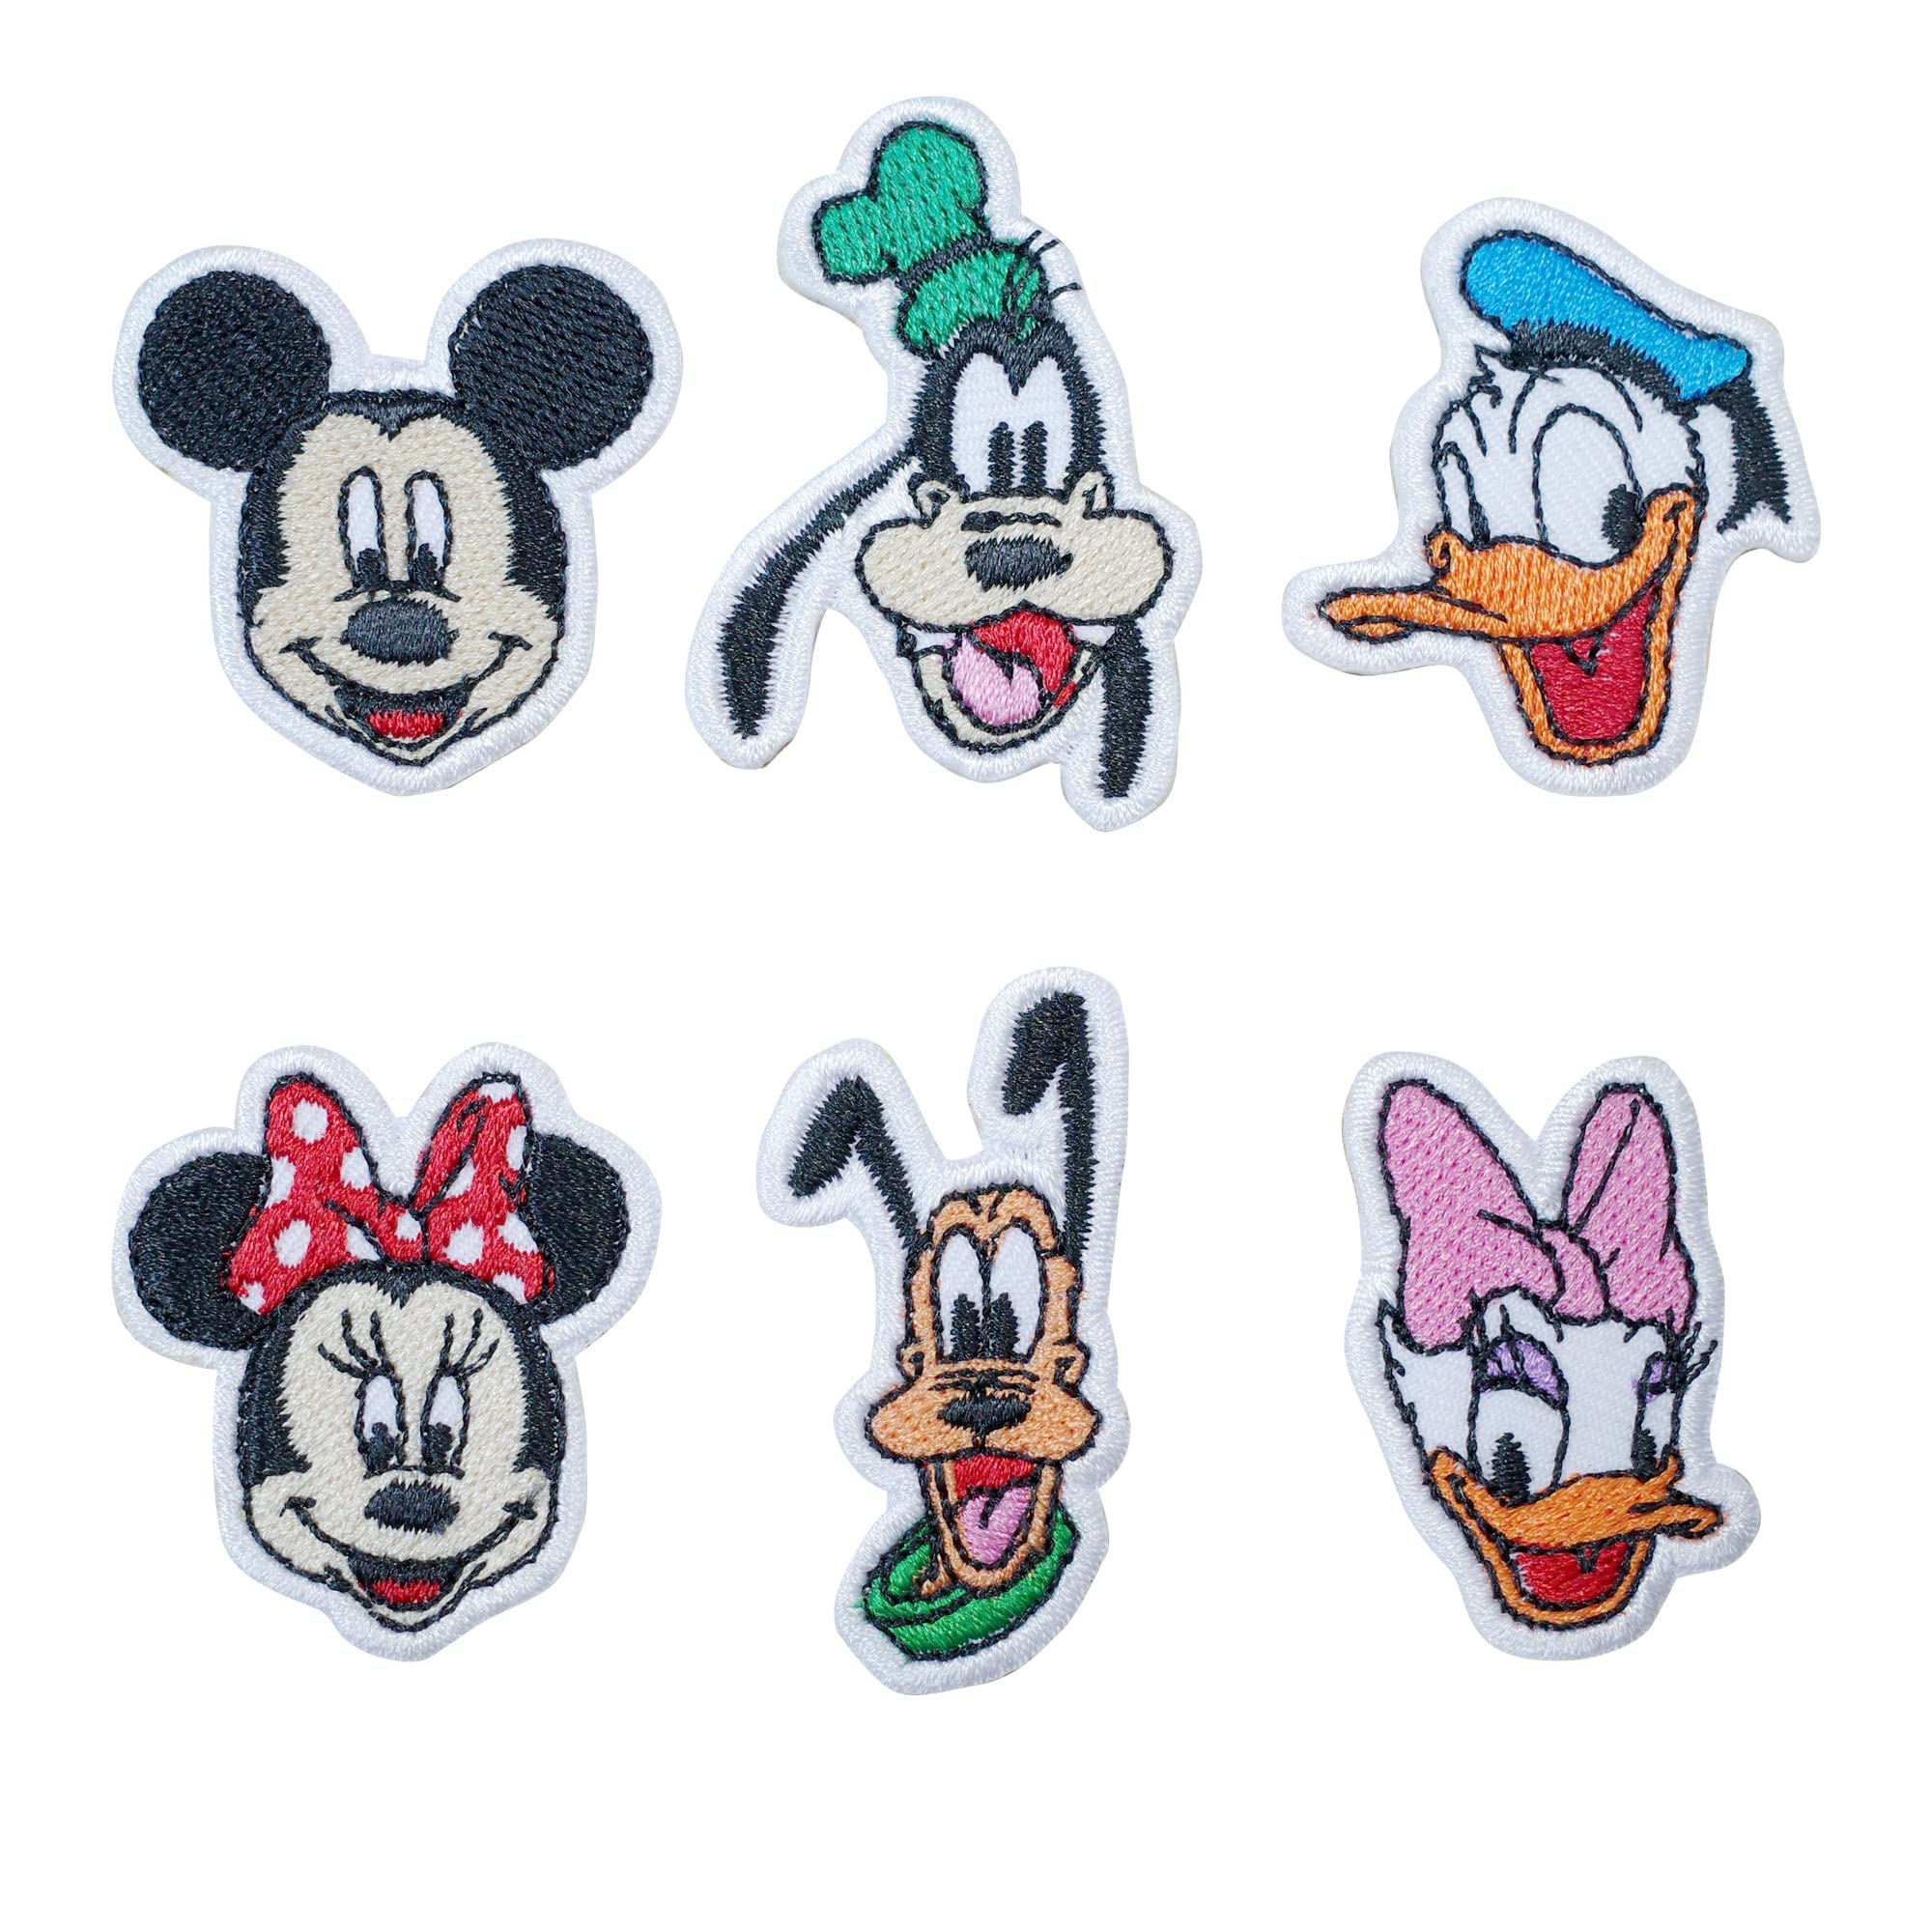 Octory 6 PCS Mini Set Cute Cartoon Mickey Iron On Patch for Clothing Saw  On/Iron On Embroidered Patch Applique for Jeans, Hats, Bags